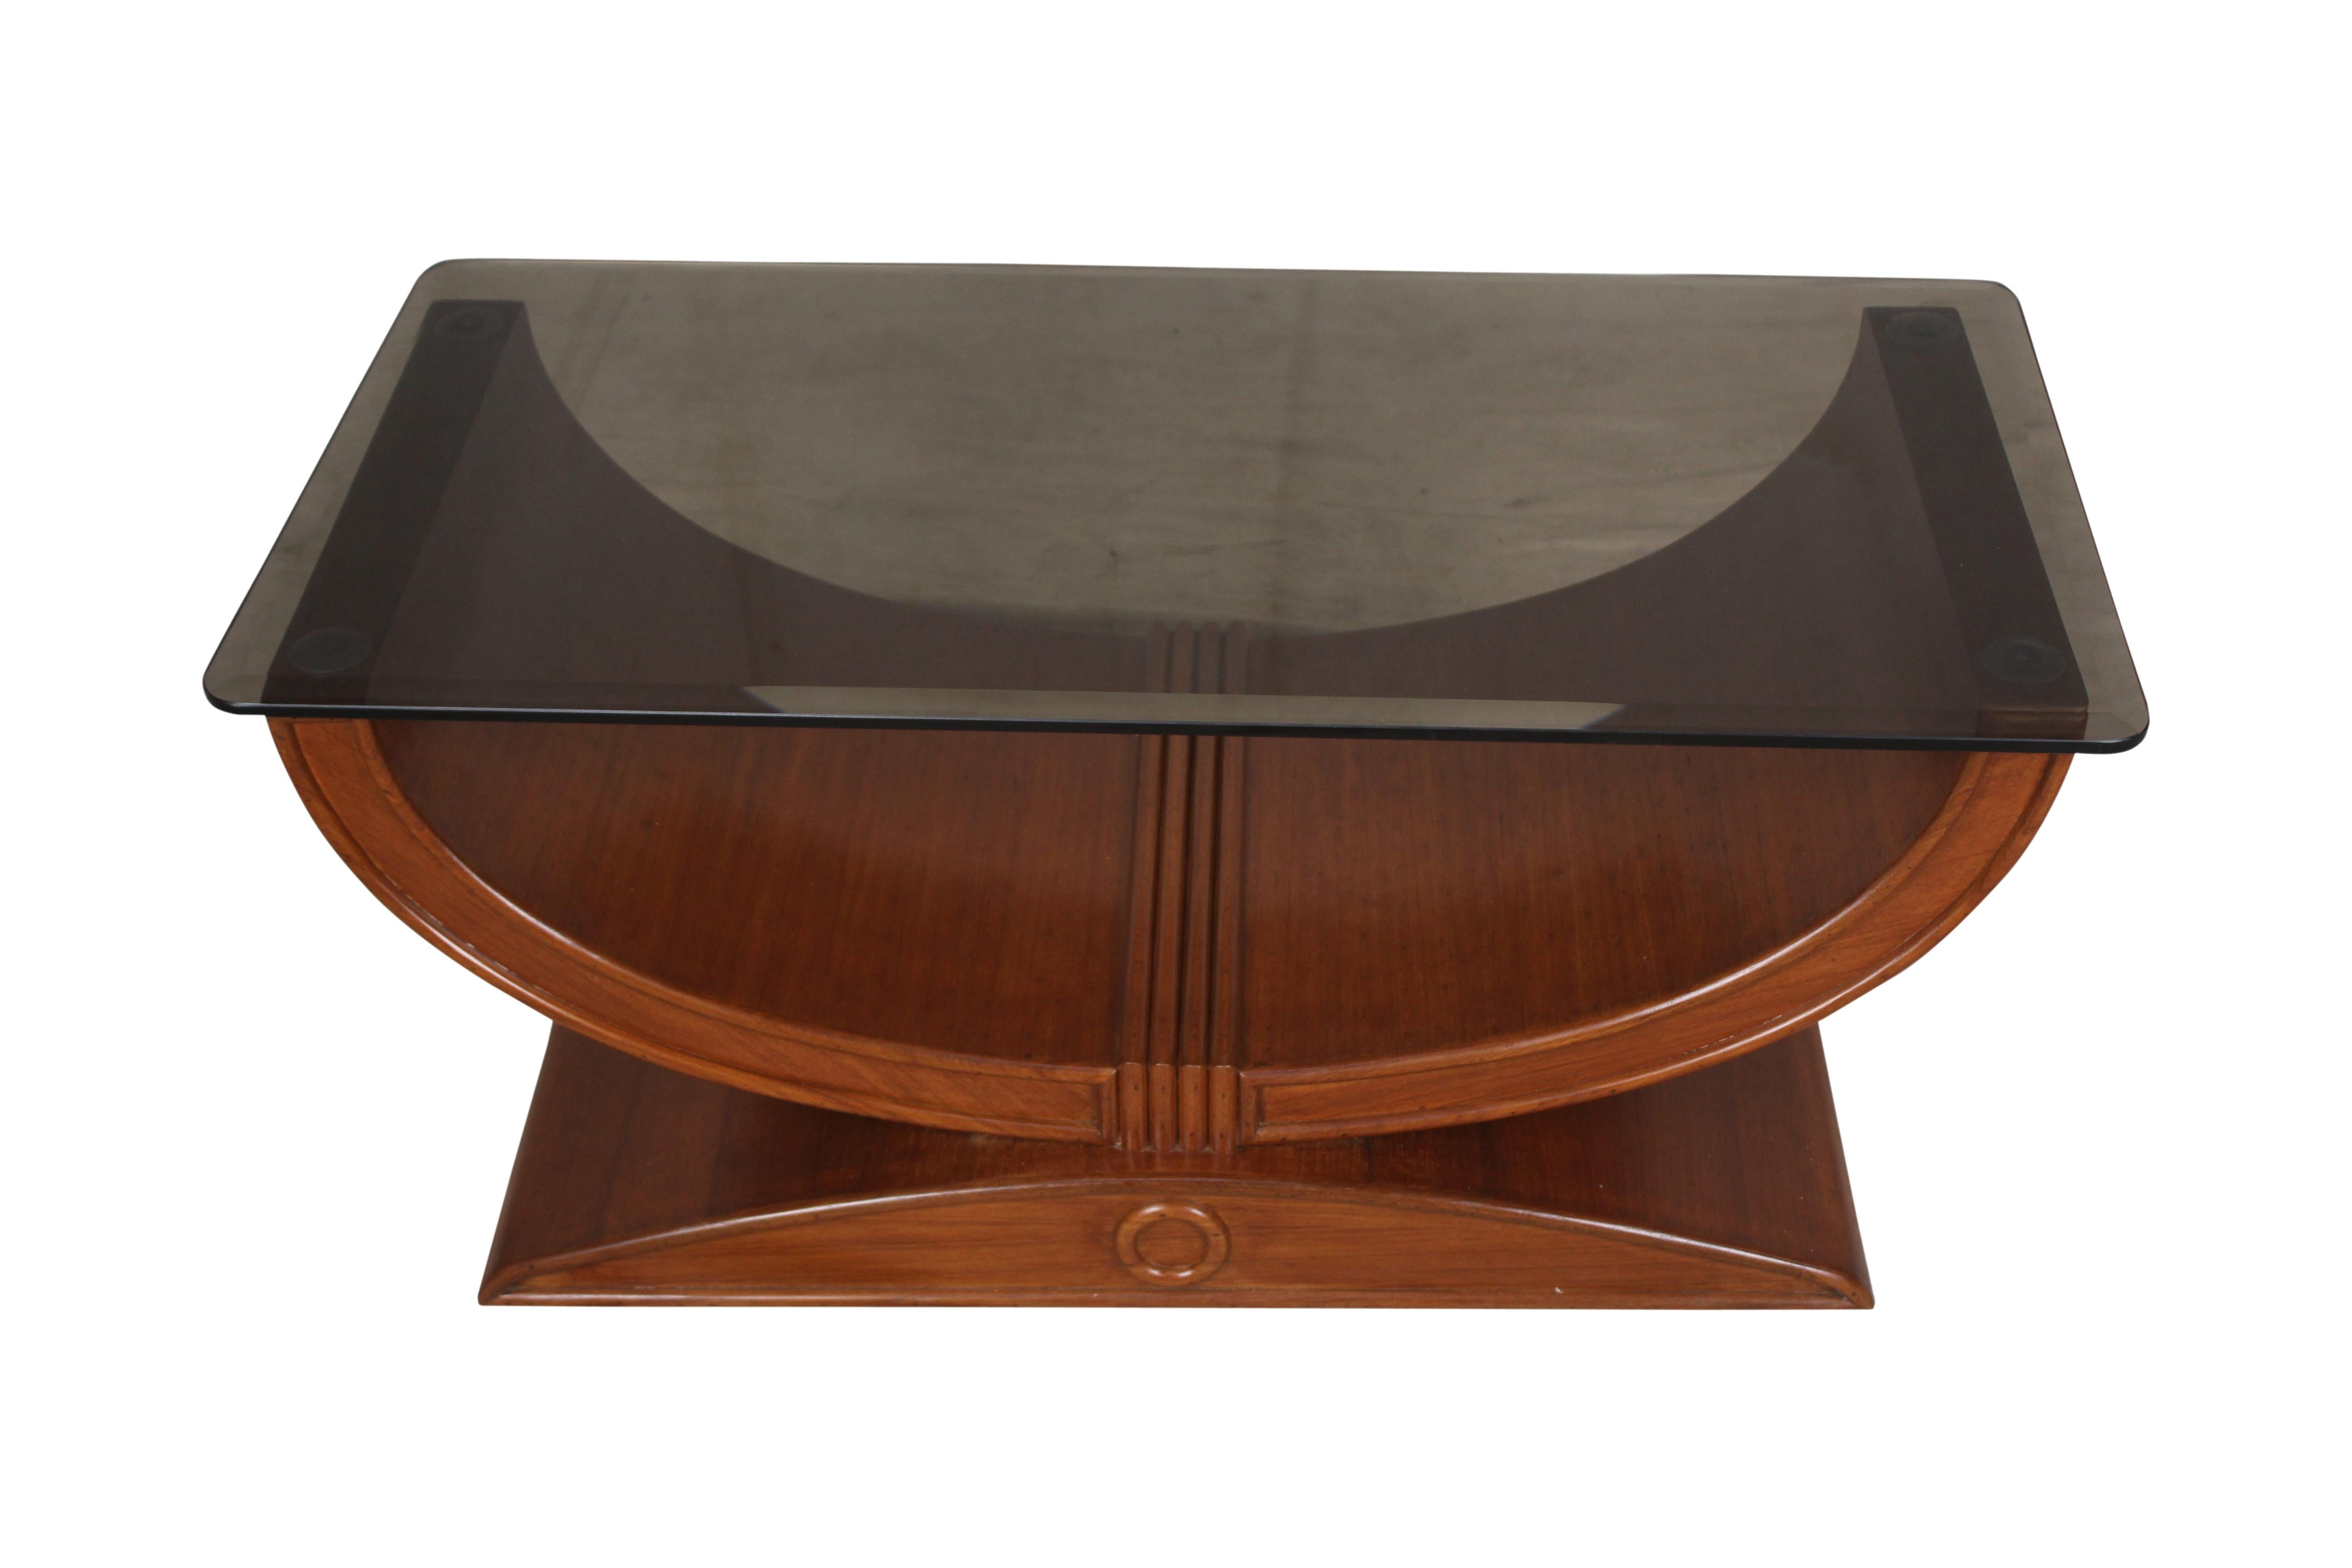 Beveled Art Deco Teak Coffee or Cocktail Table with Smoked Glass Top